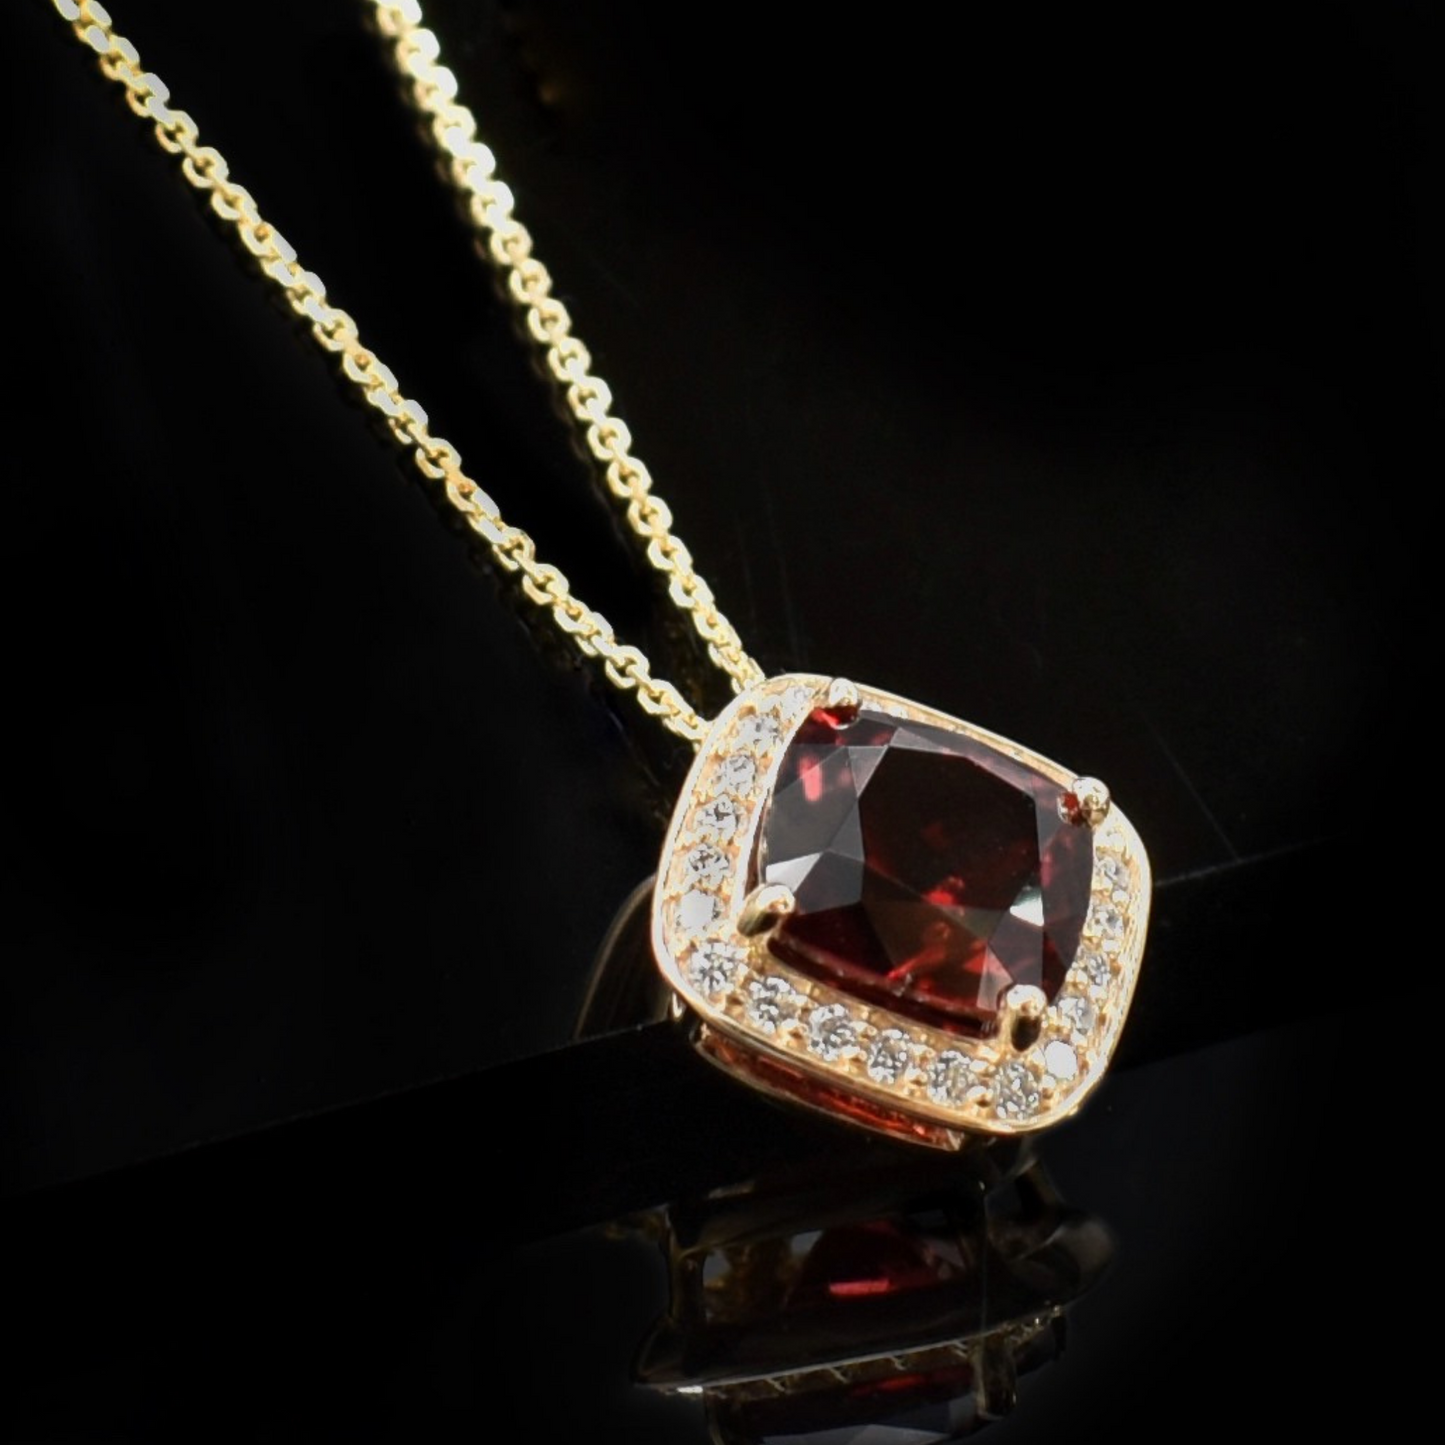 ashes necklace for memorial garnet and diamond